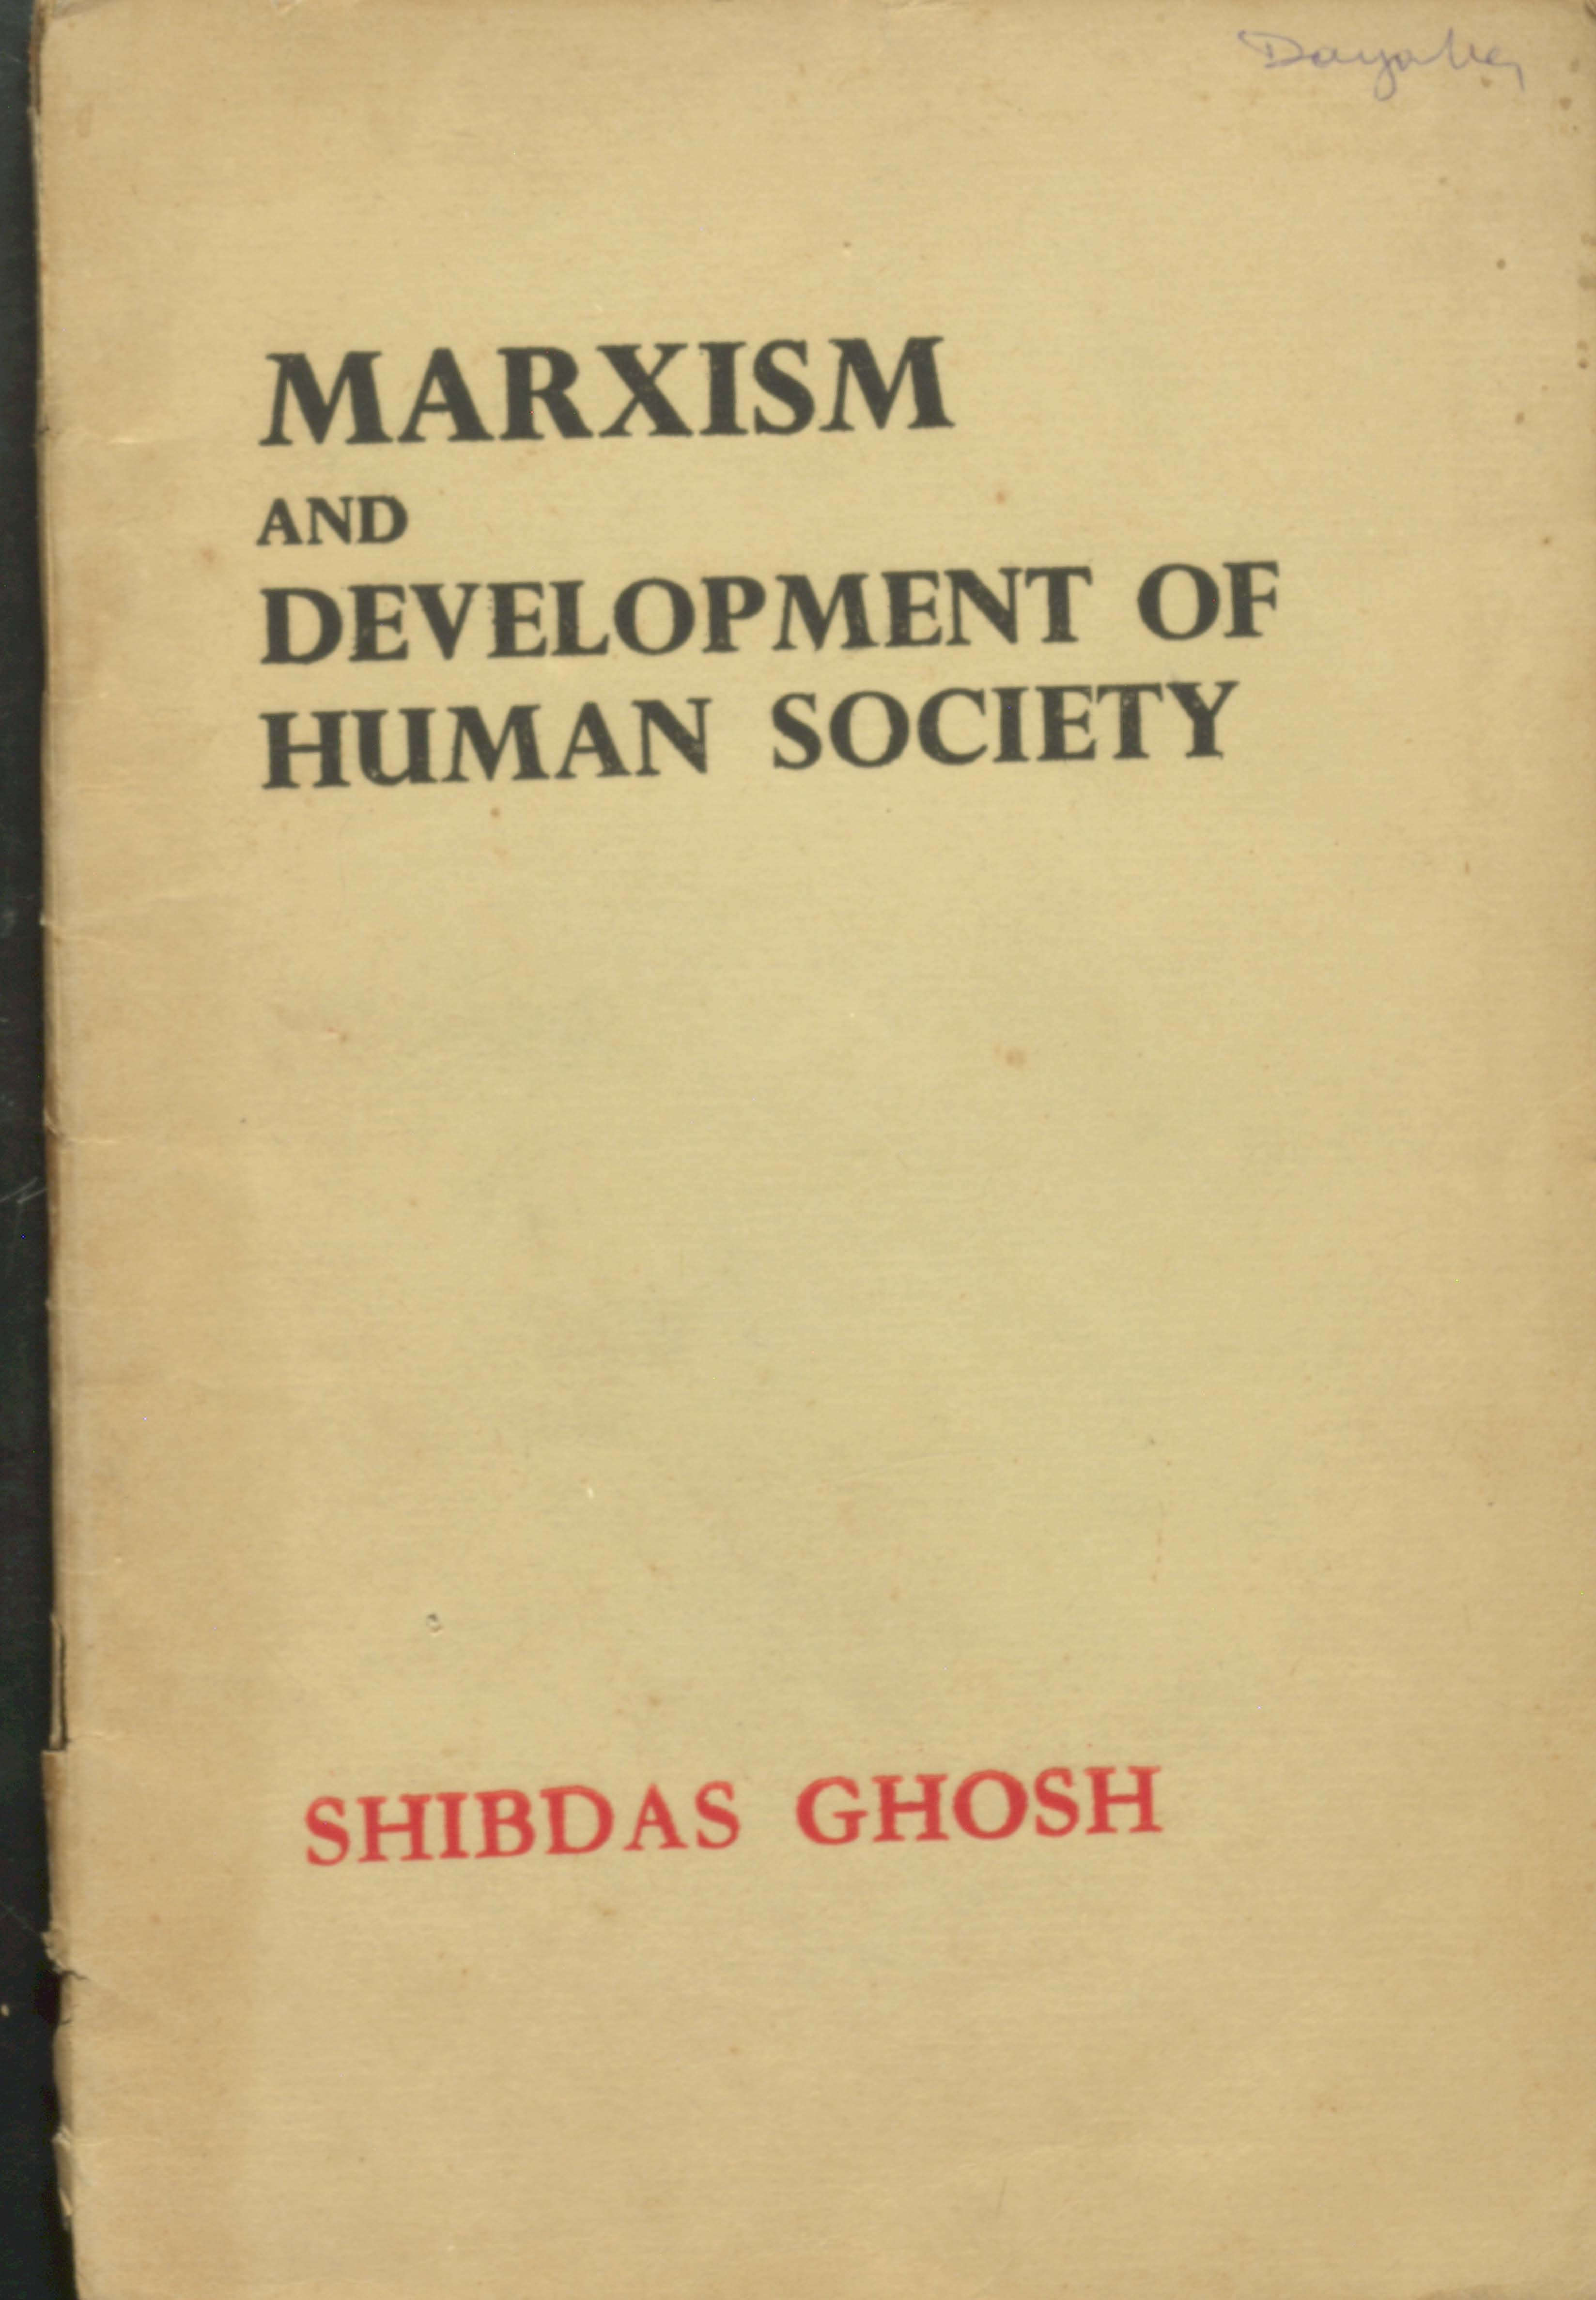 Marxism and development of human society